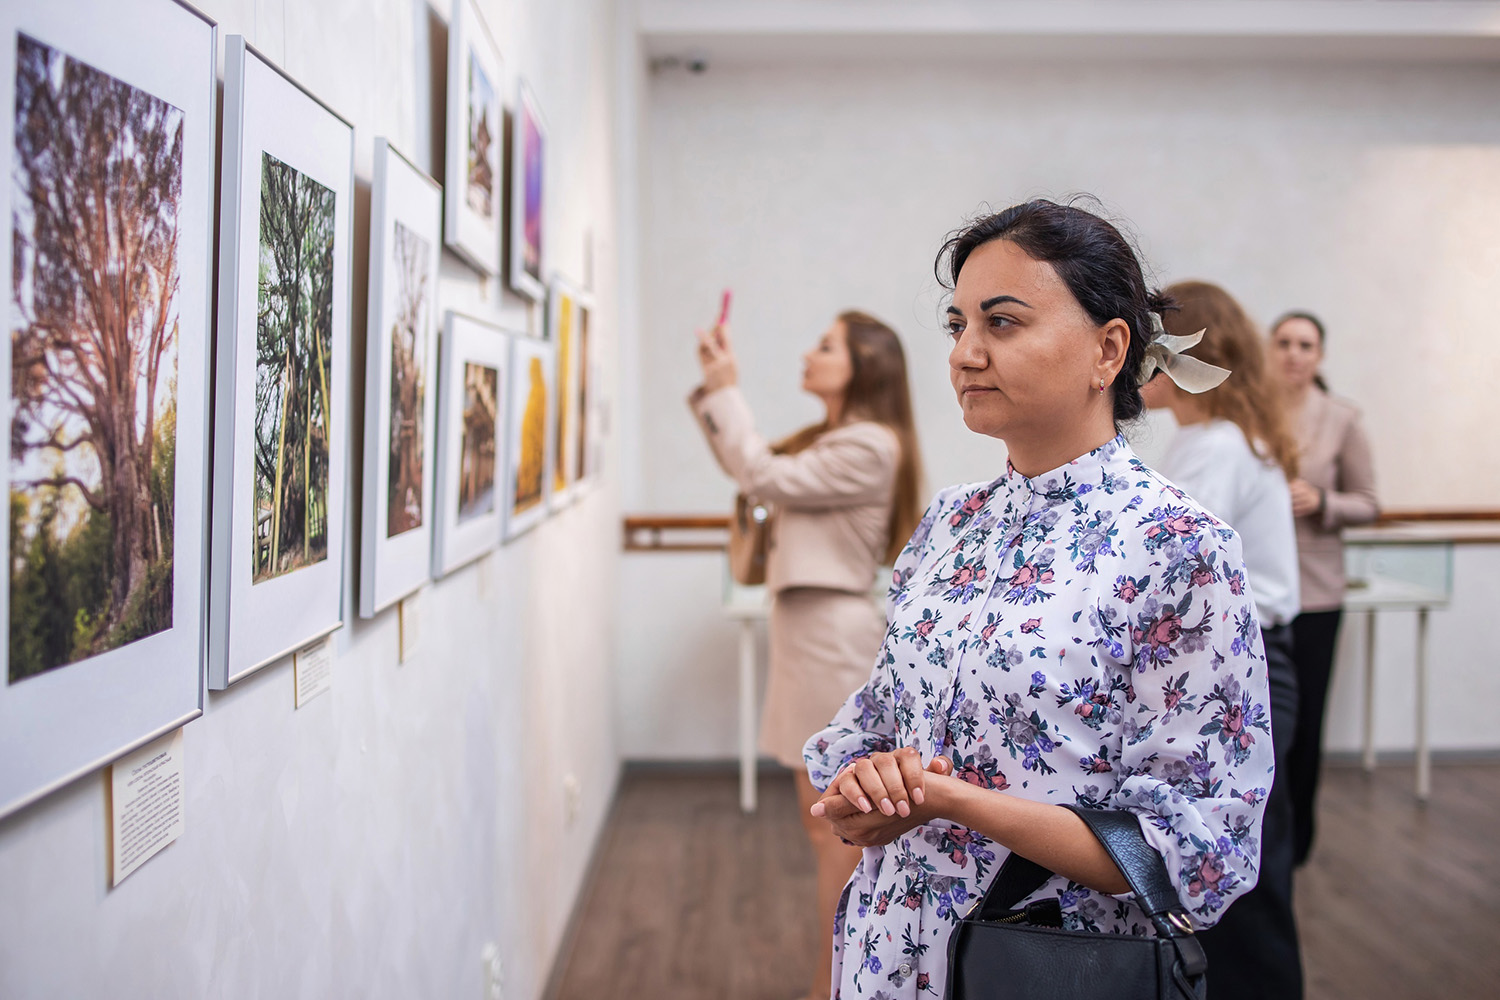 the solo exhibition at the Museum of Nature and Man, located in Khanty-Mansiysk